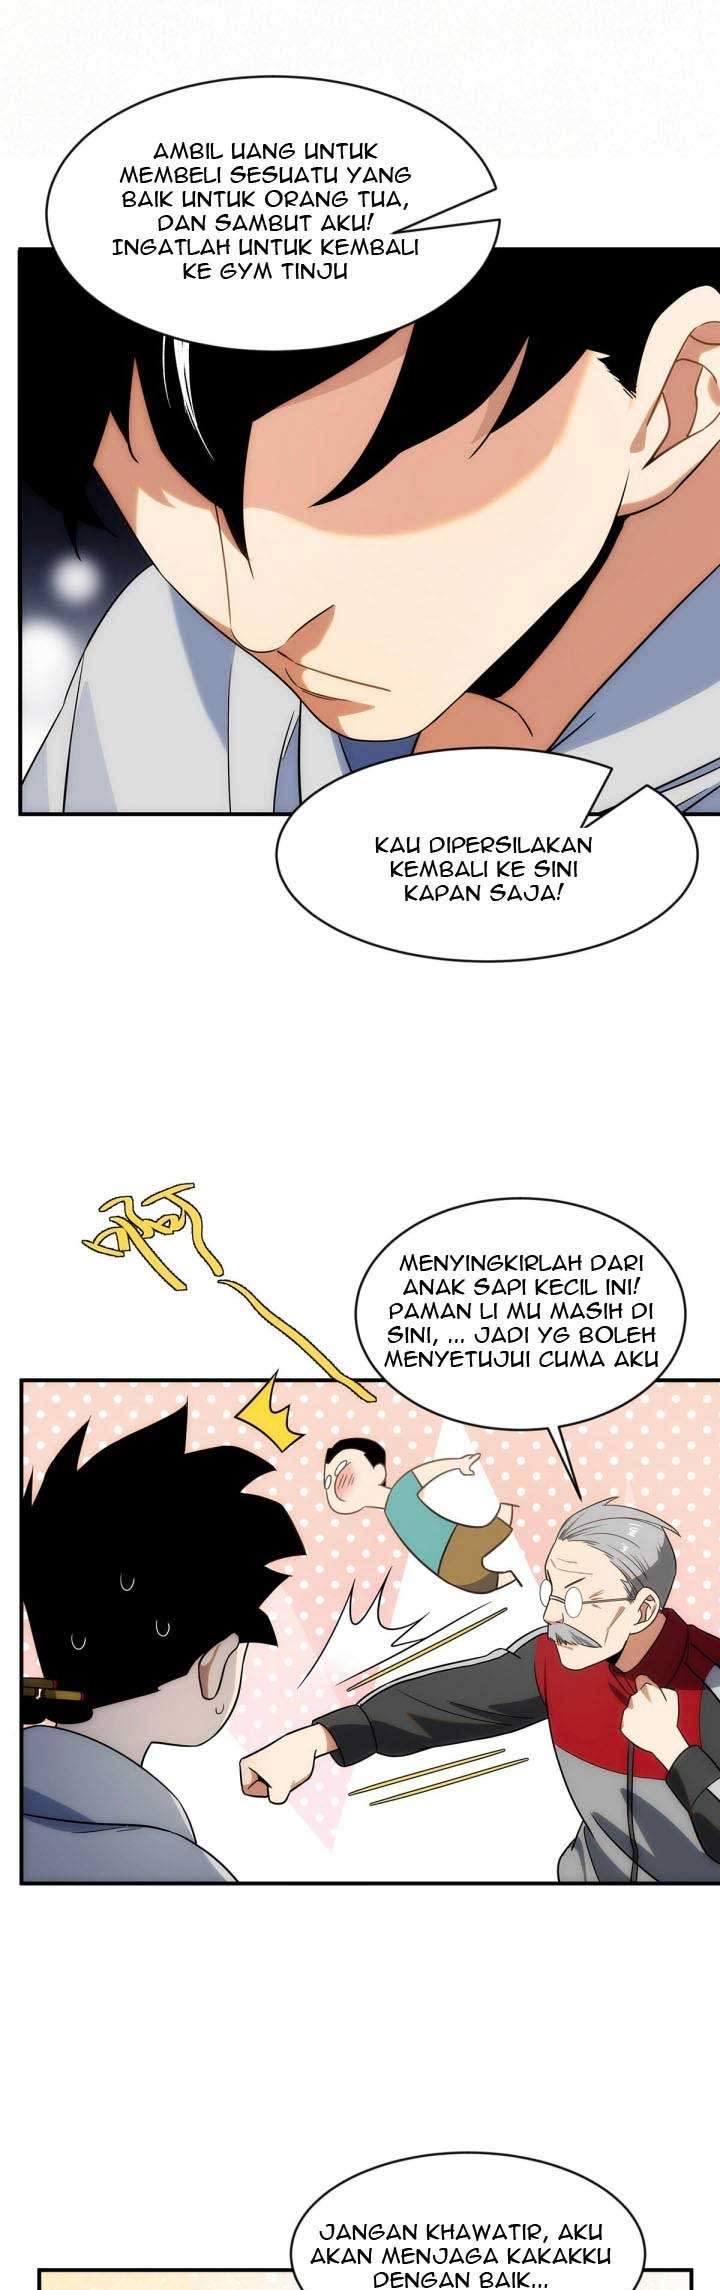 The legend are true Chapter 07